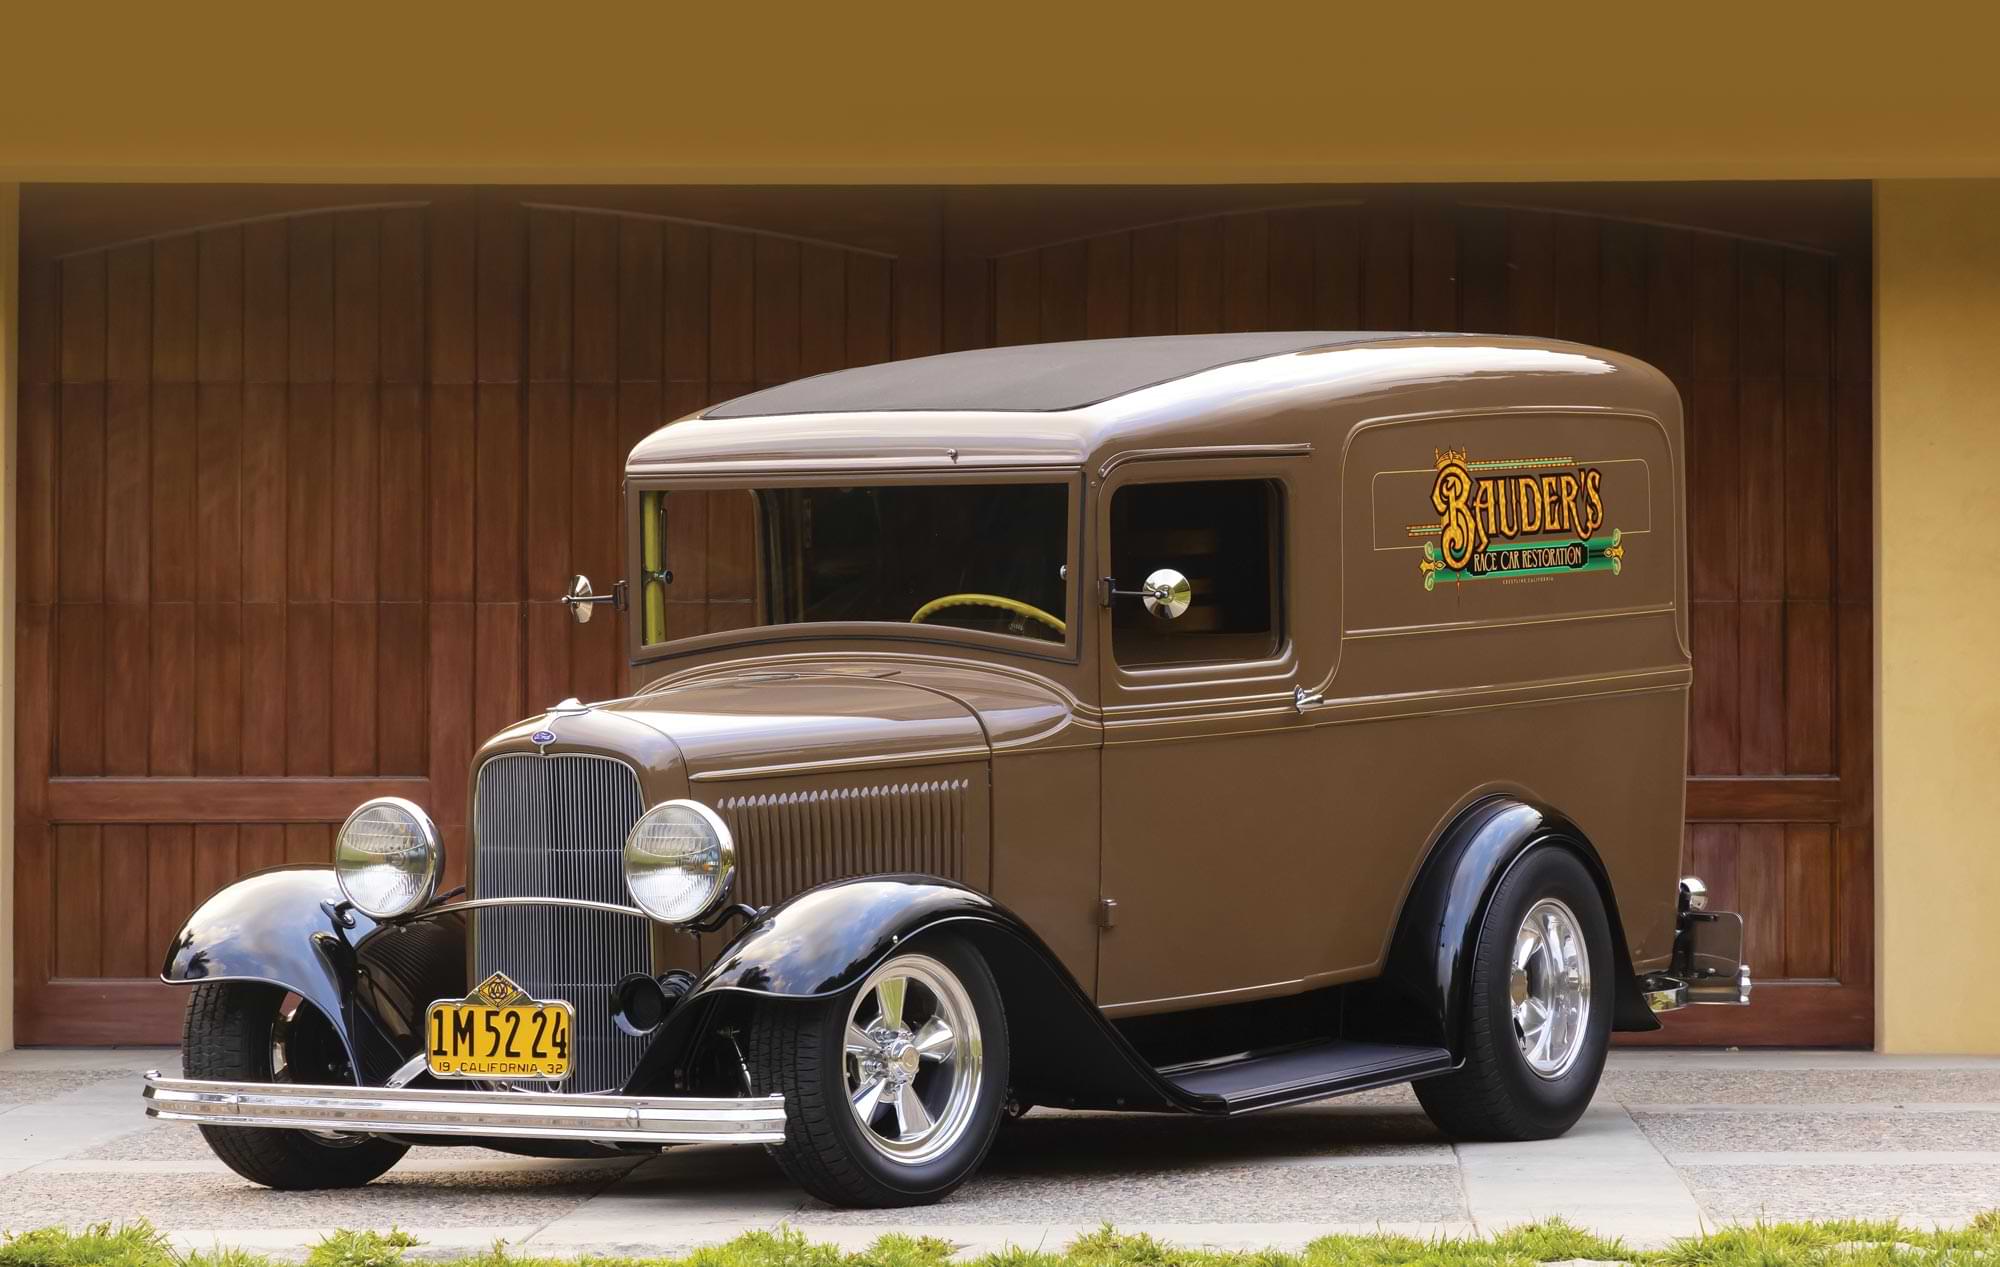 three quarter drivers side view of the '32 Ford Panel in brown, with black fenders and a side graphic text reading "Bauder's Race Car Restoration"